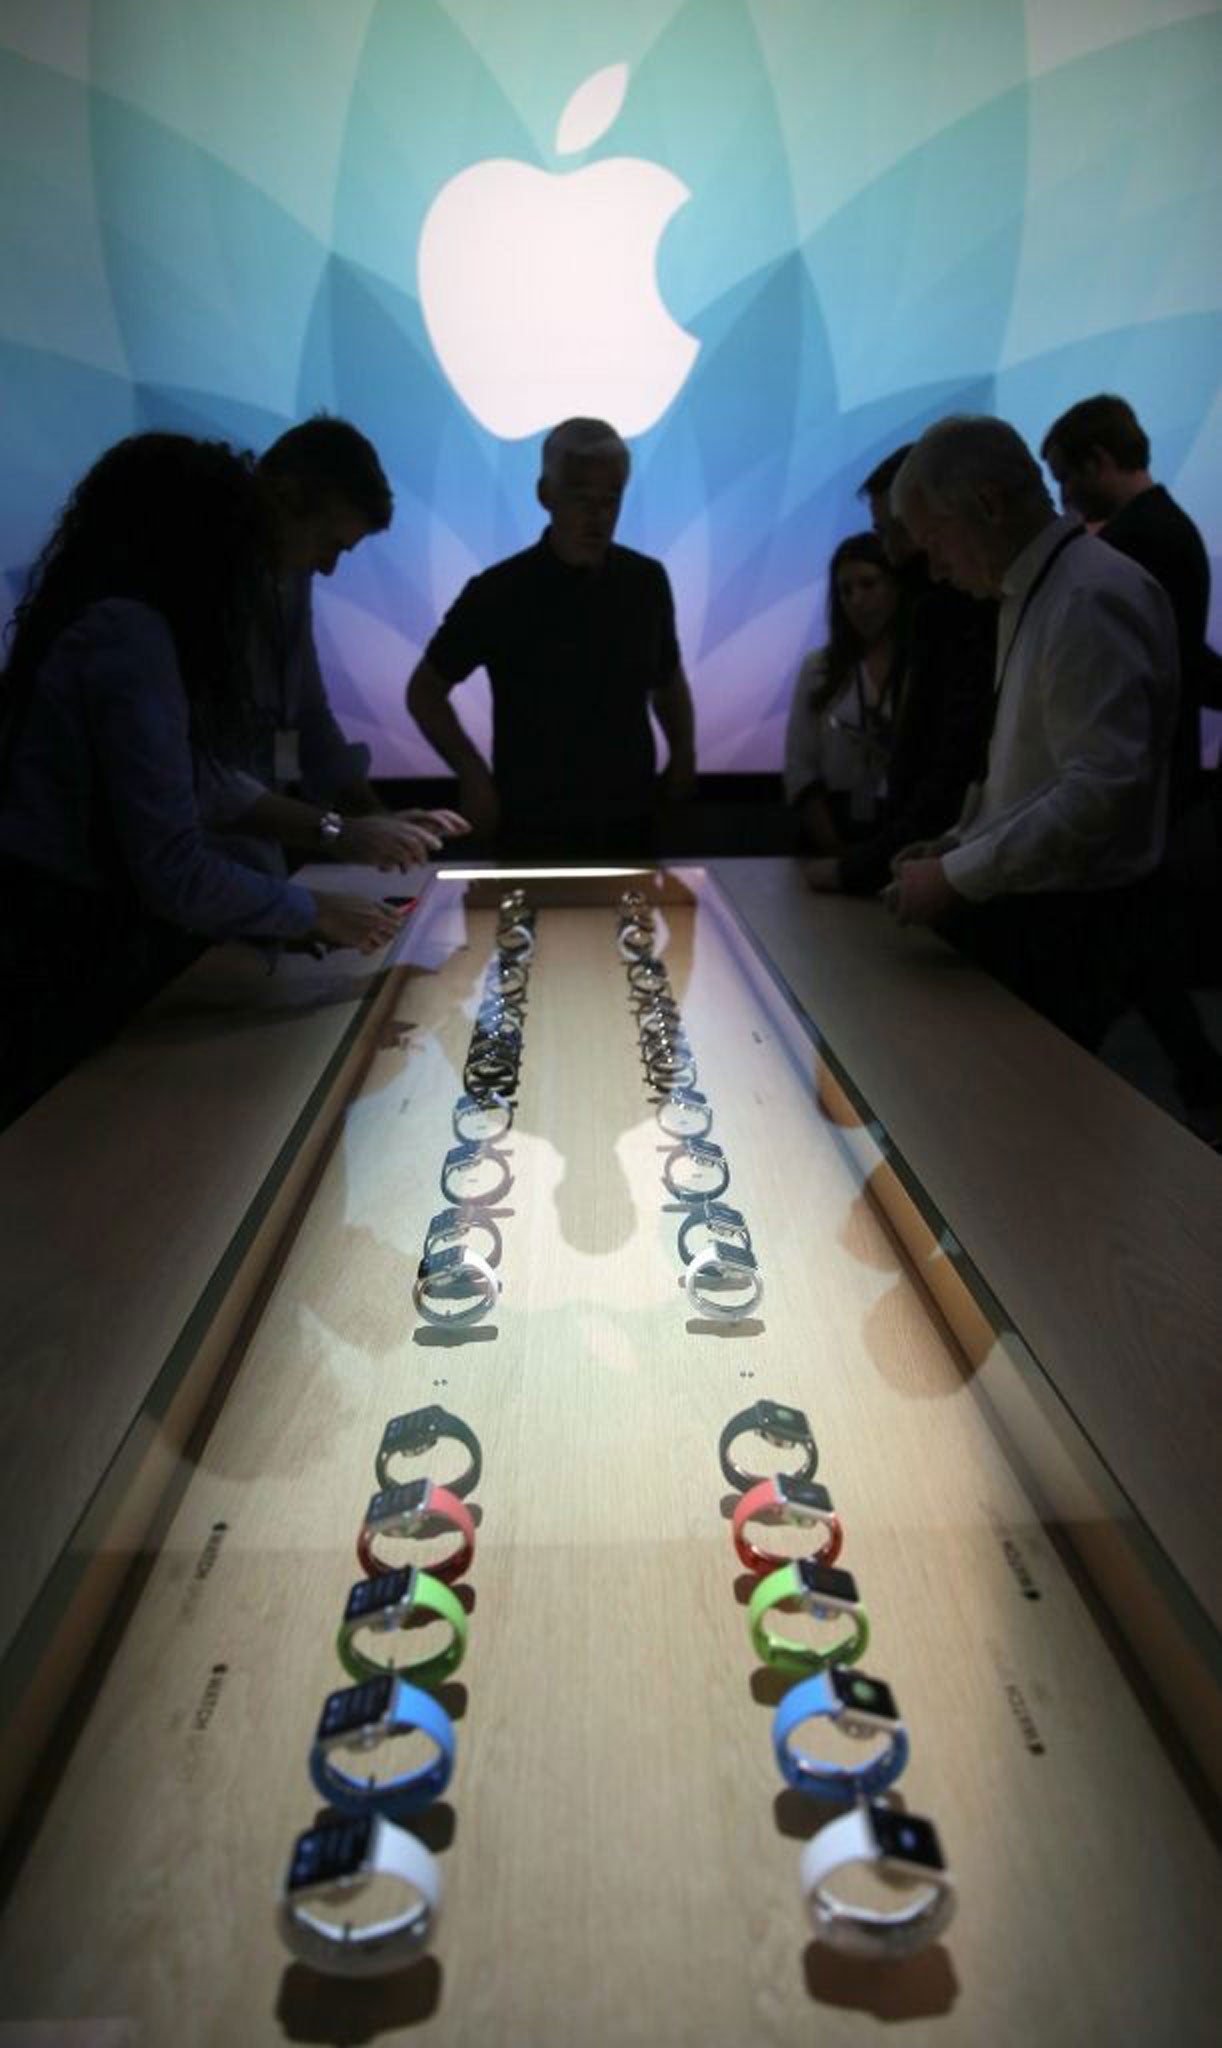 Apple's watch goes back to basics, with old-style, if virtual, hands, and a real crown wheel